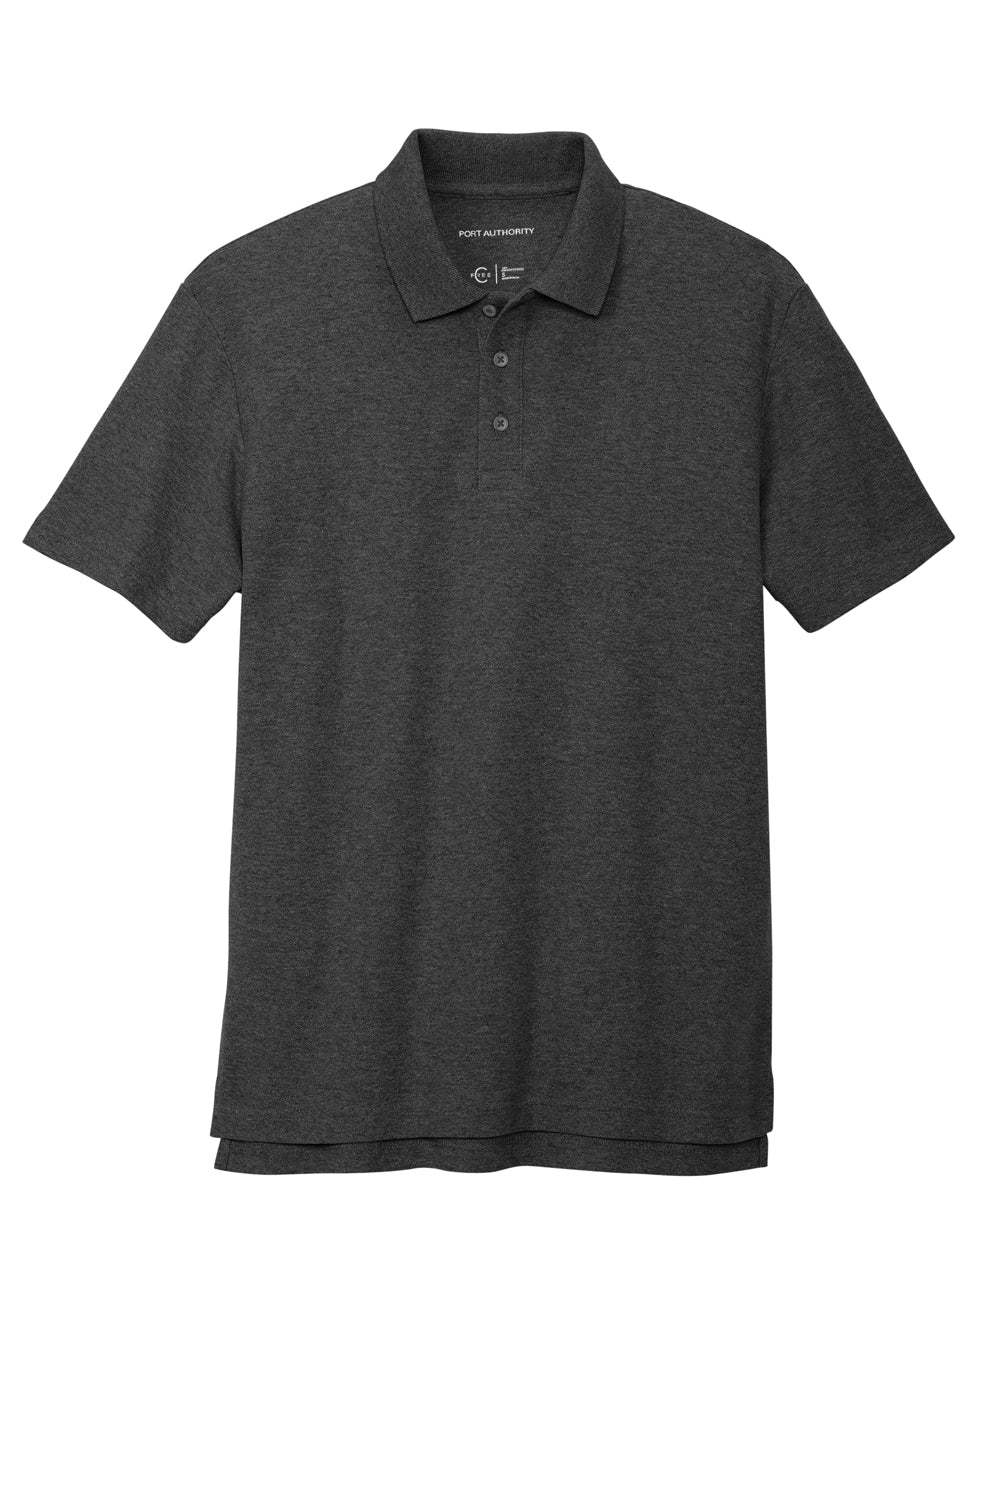 Port Authority K867 Mens C-FREE Pique Short Sleeve Polo Shirt Heather Charcoal Grey Flat Front